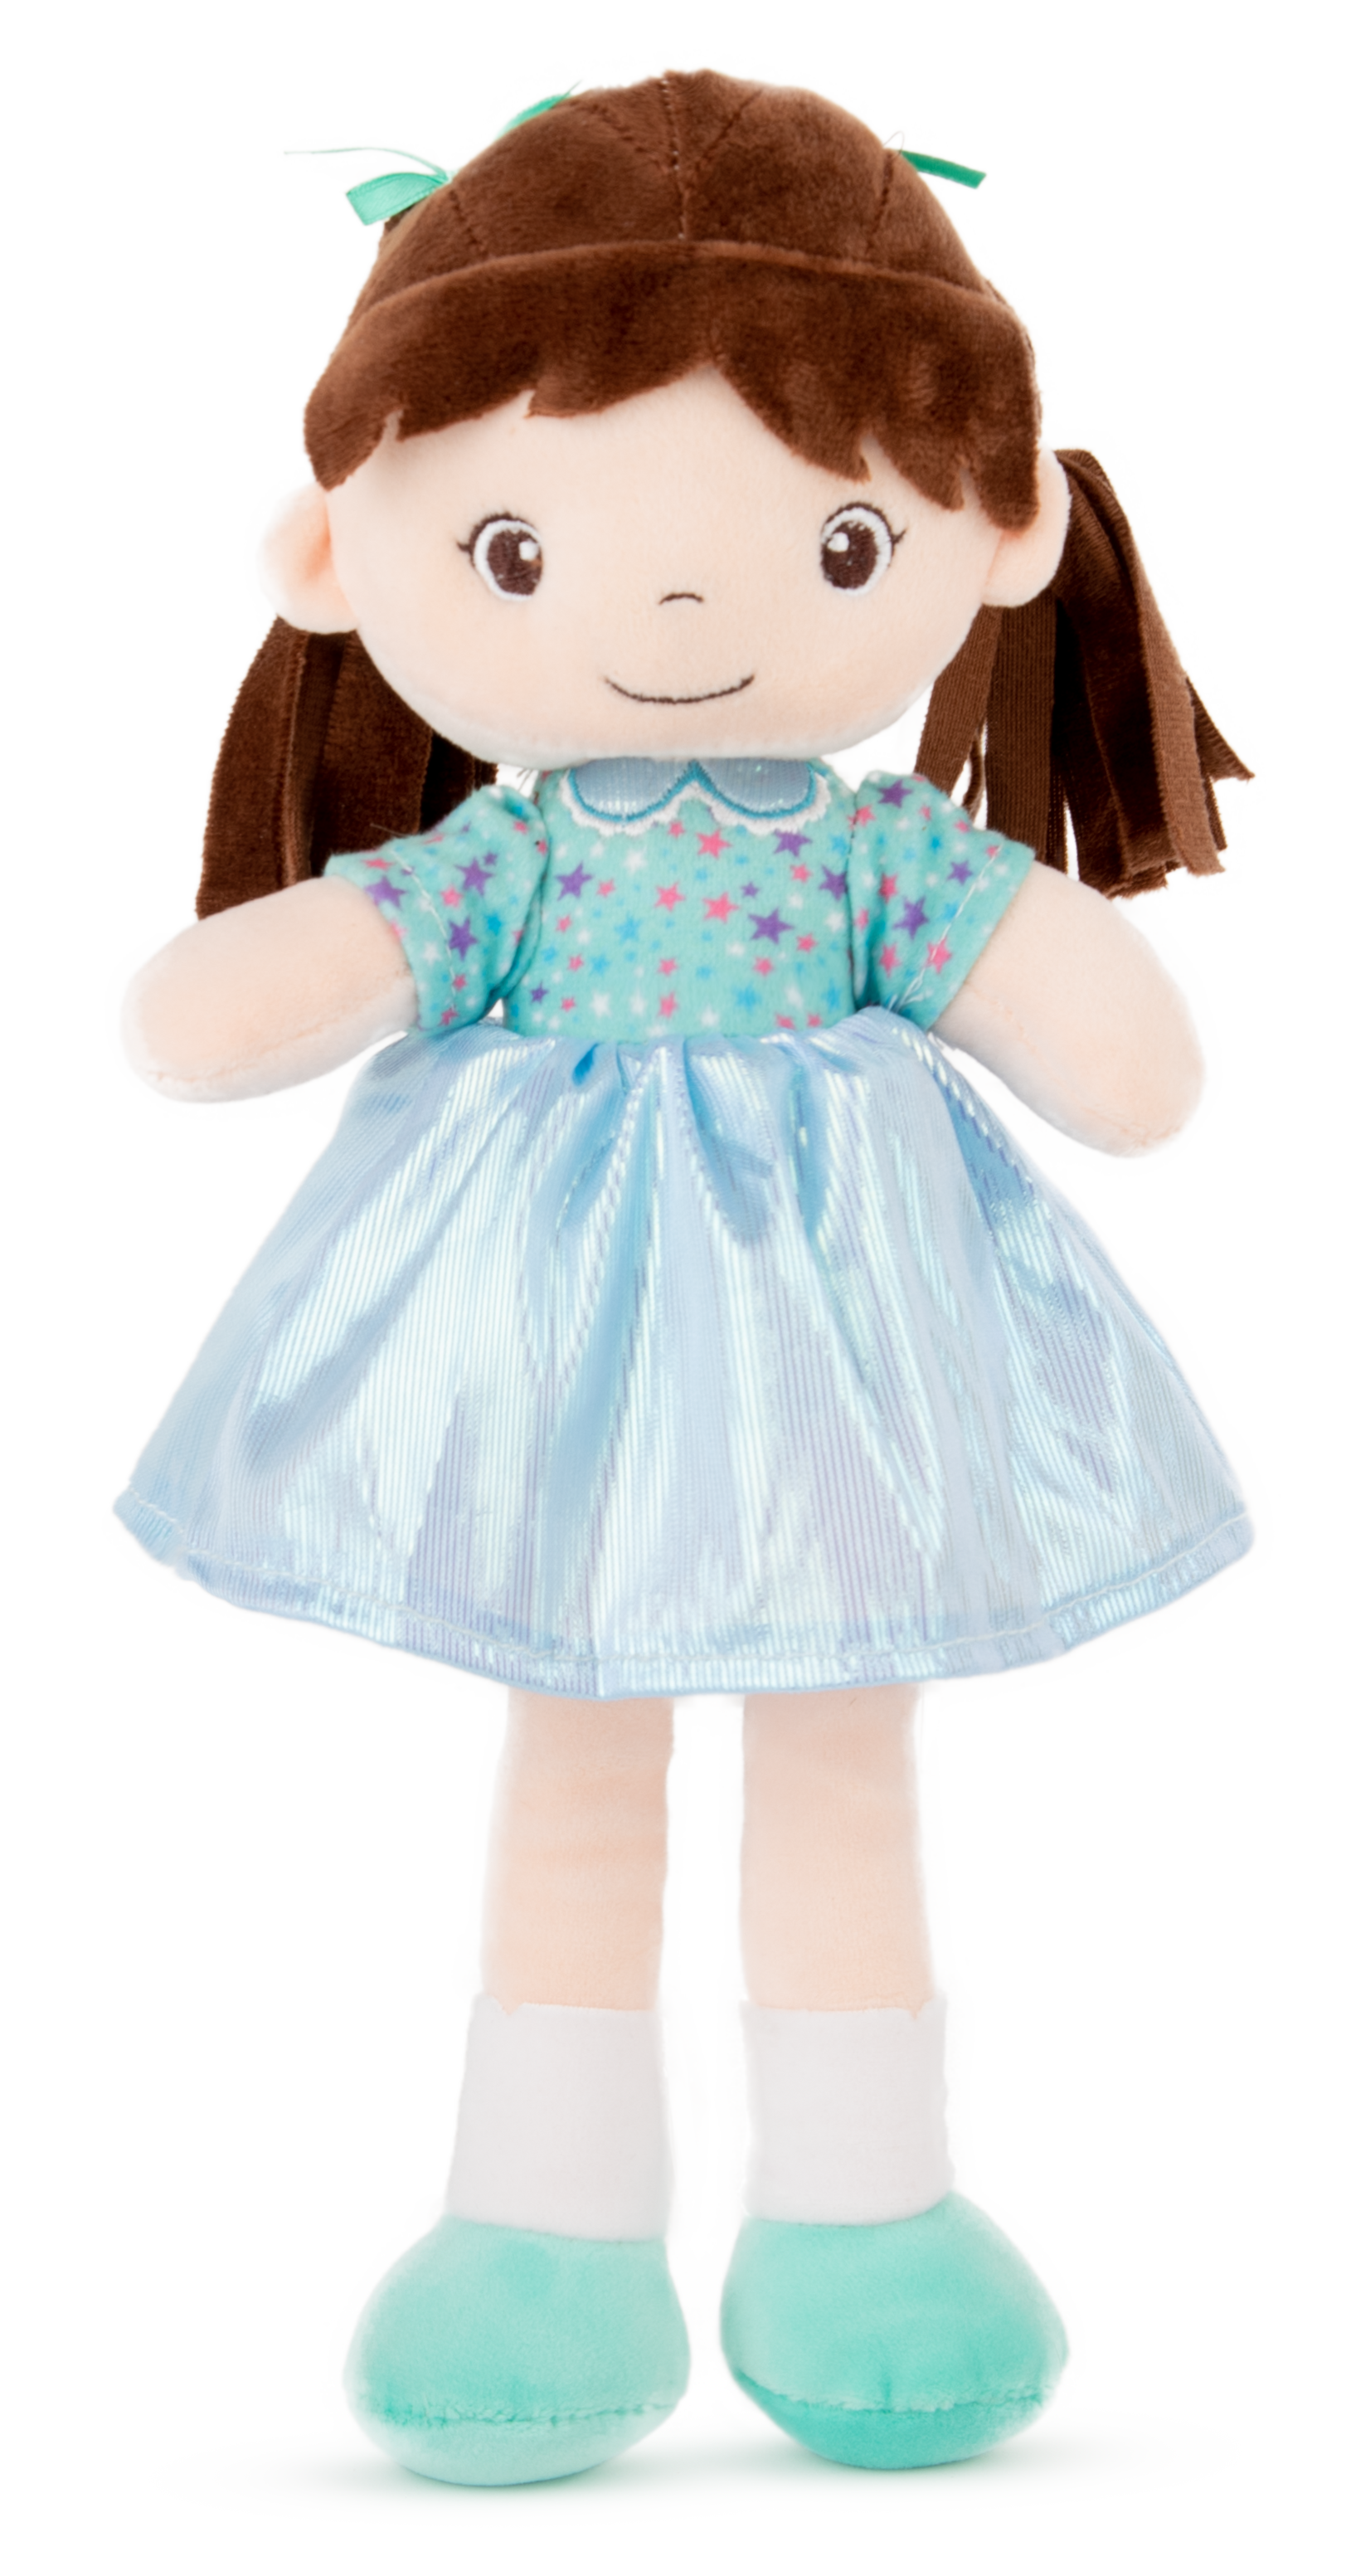 Doll with dress - Blue